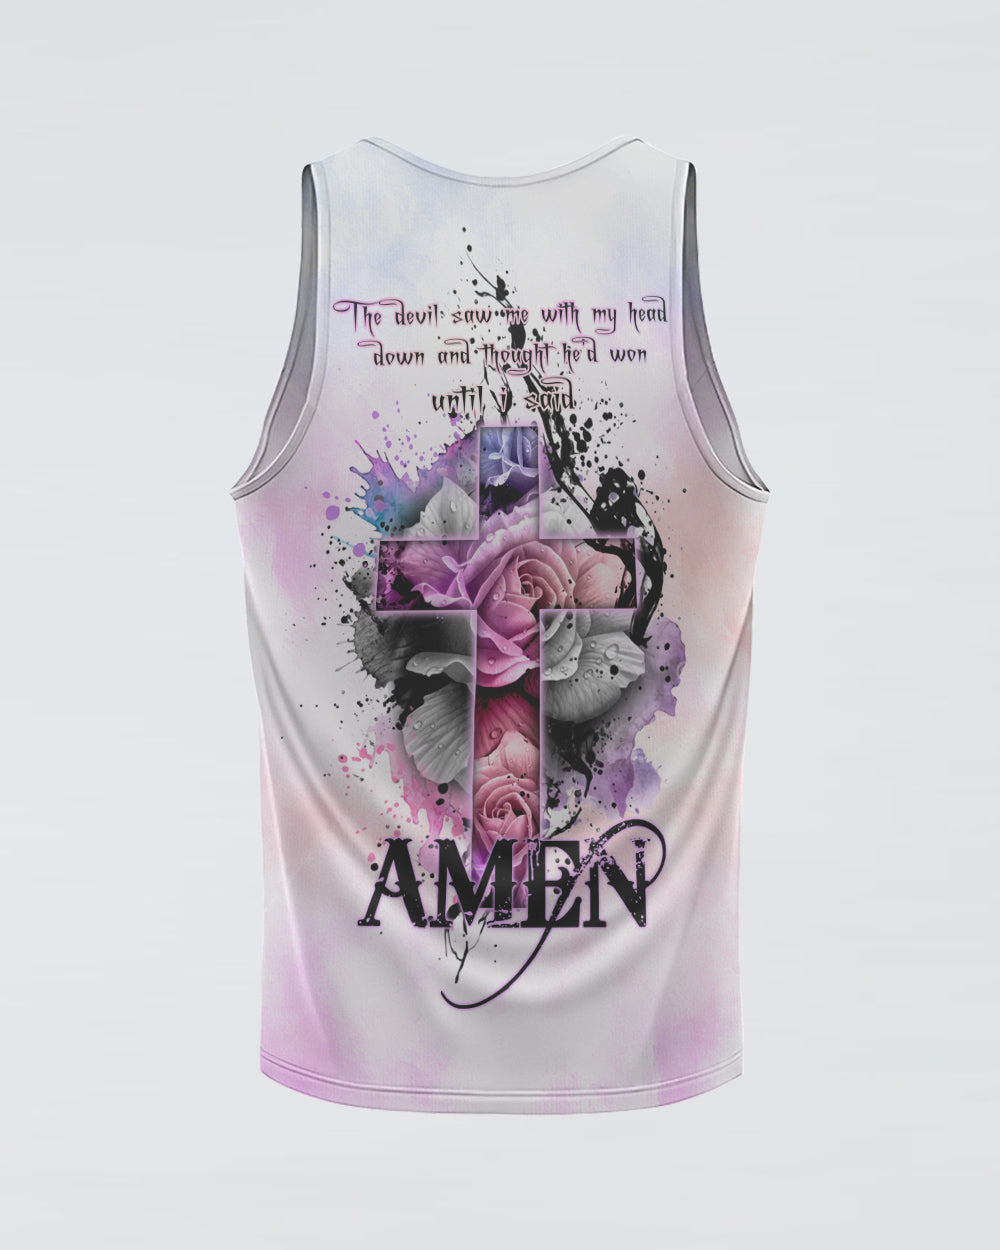 The Devil Saw Me With My Head Down Rose Cross Women's Christian Tanks